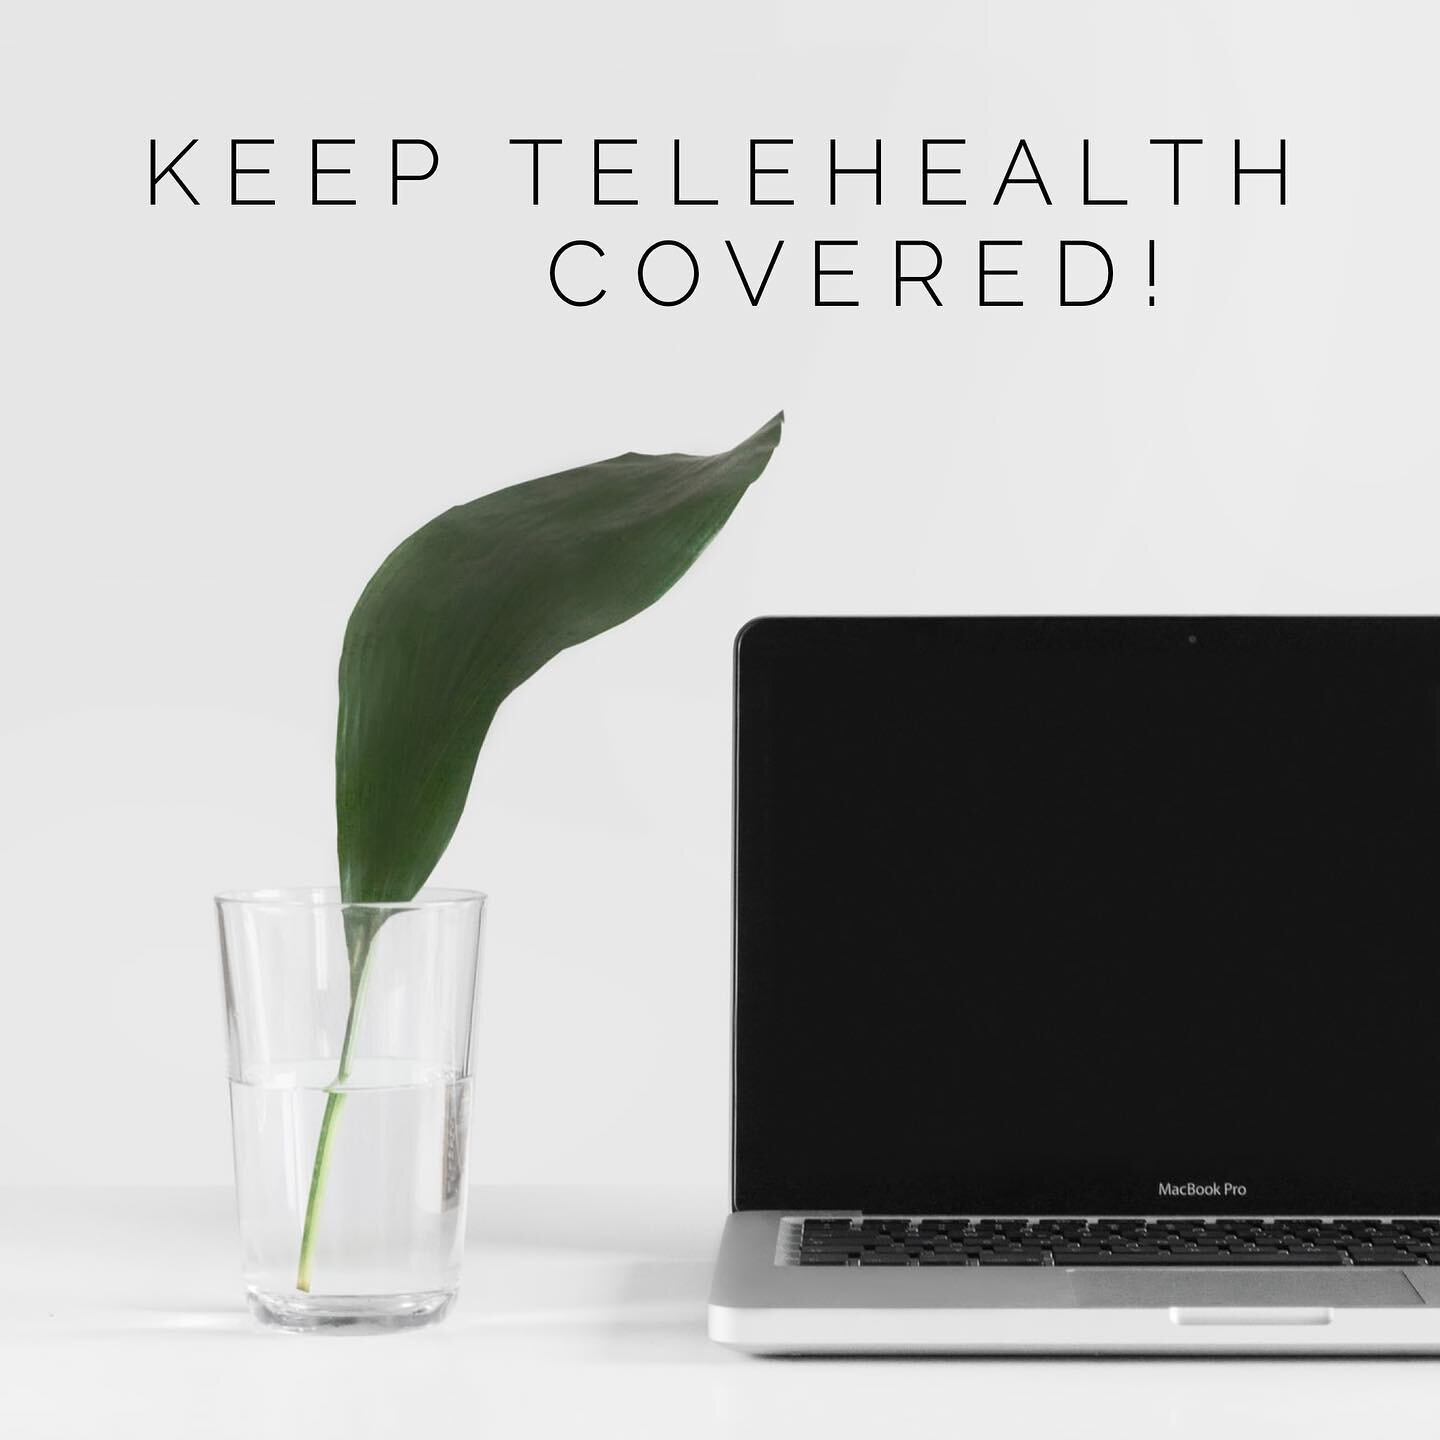 Telehealth has provided an opportunity for our clients to access care around emotional well-being and relationship distress during Covid. This right to quality and convenient care may be impossible to access if insurance coverage for telehealth benef